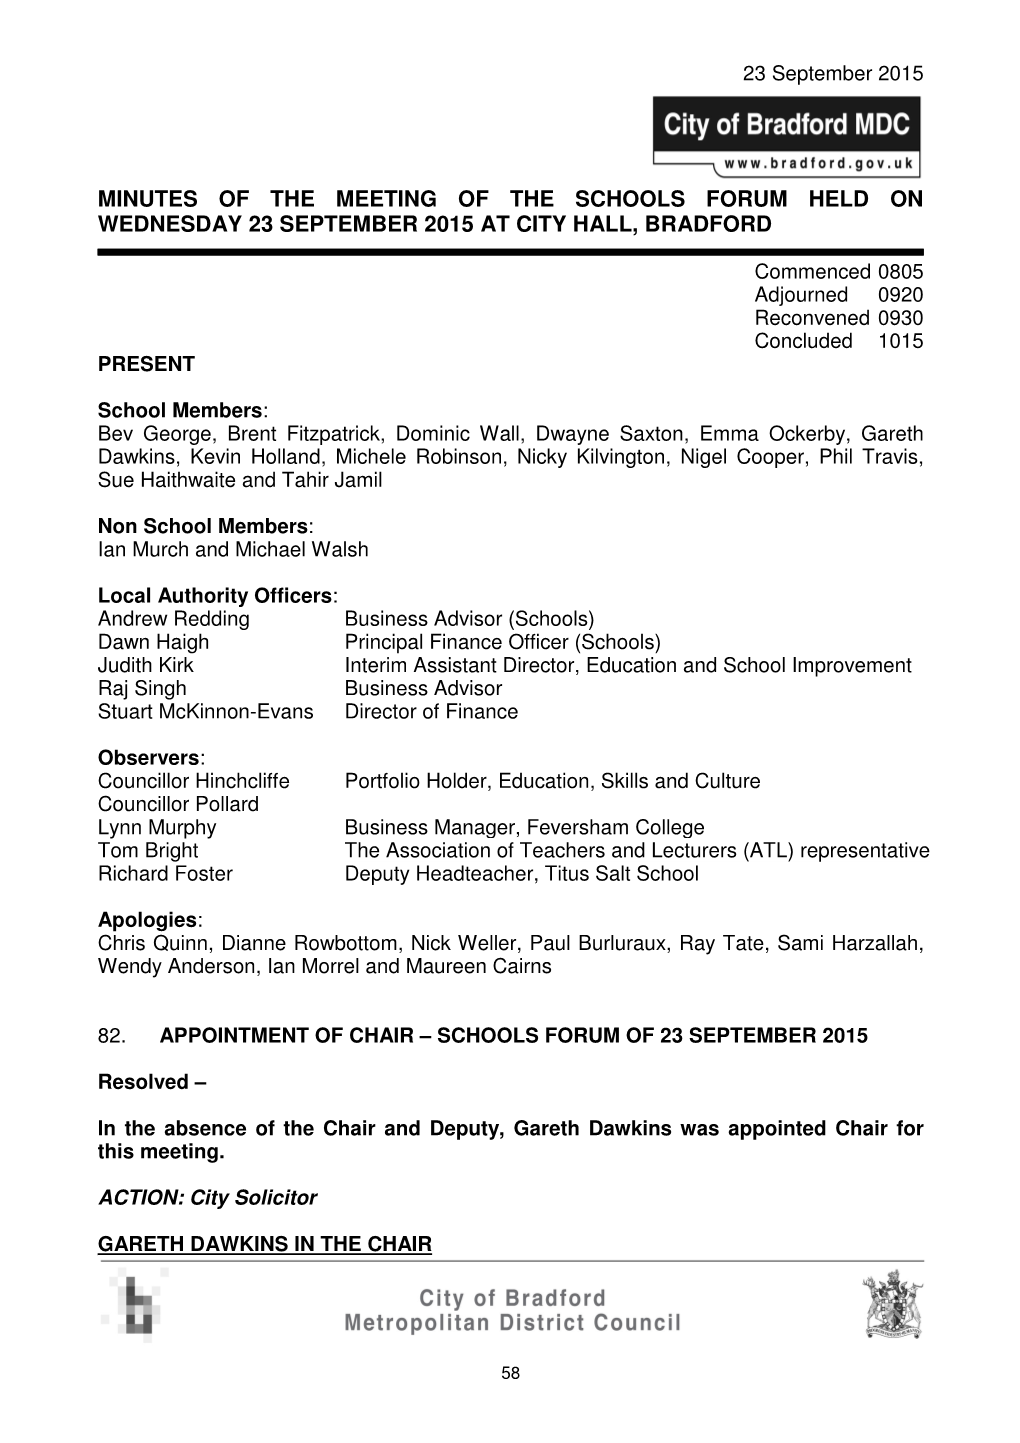 Minutes of the Meeting of the Schools Forum Held on Wednesday 23 September 2015 at City Hall, Bradford